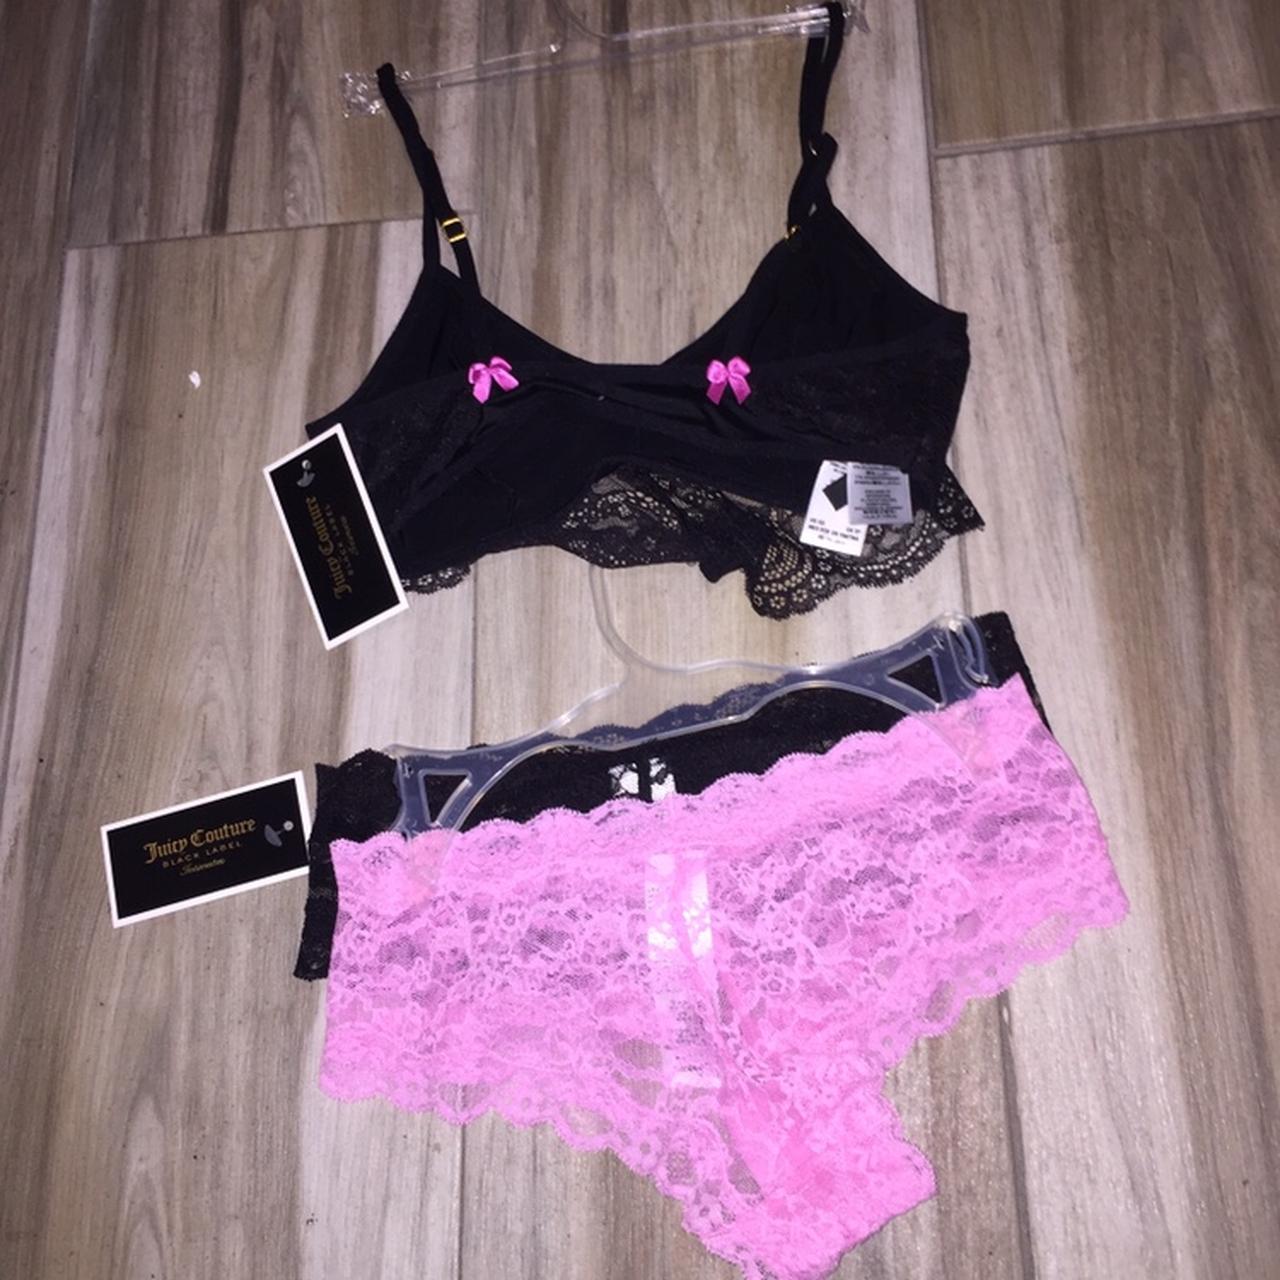 ❣️👙 {Juicy Couture} Red lace bra & thong set 👙❣️ Hook - Depop